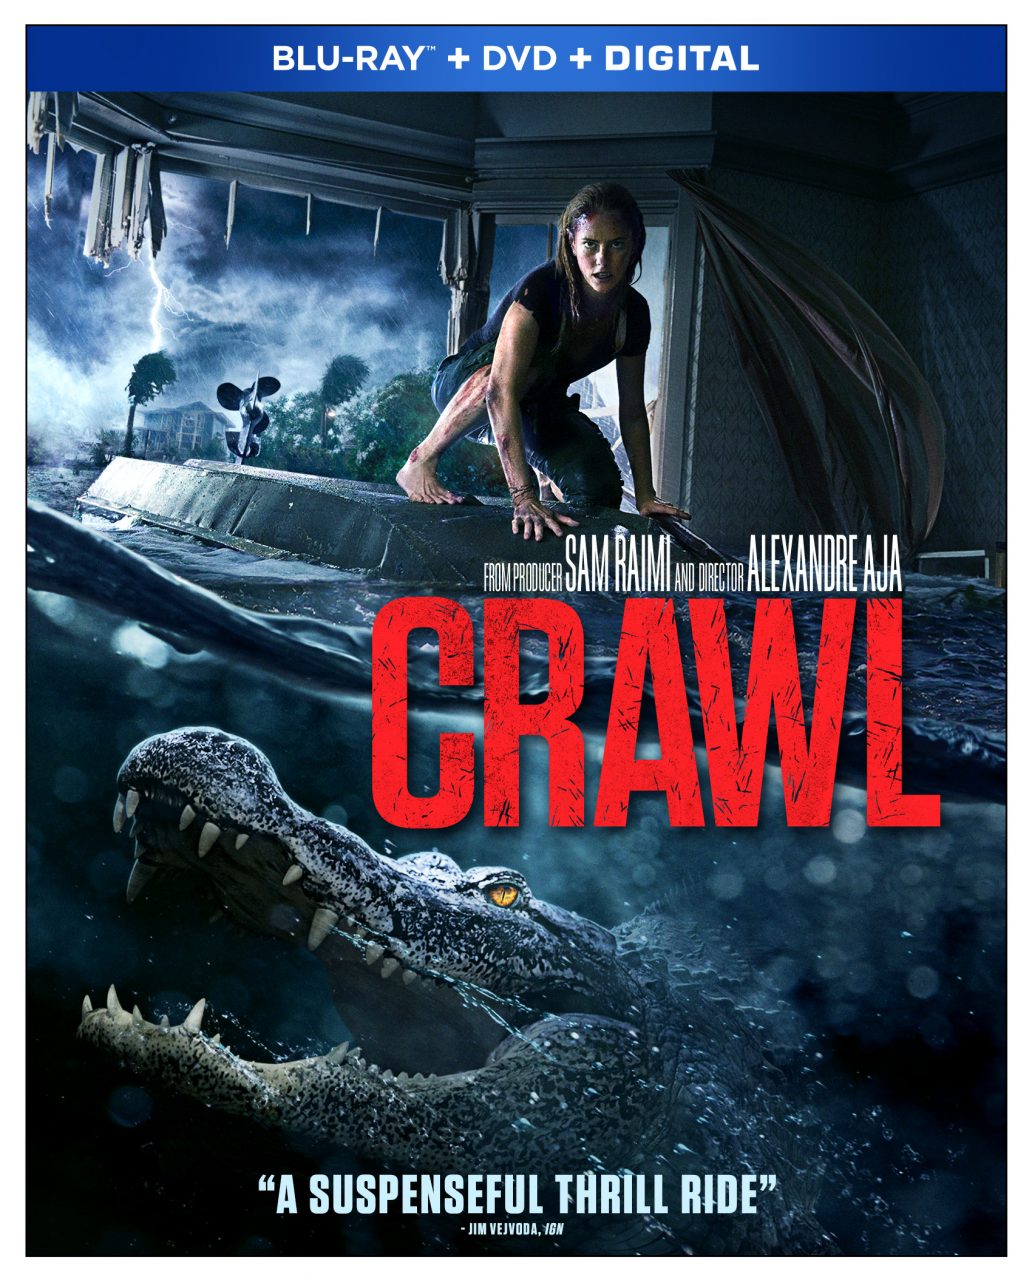 Crawl Blu-Ray Combo Pack cover (Paramount Home Entertainment)